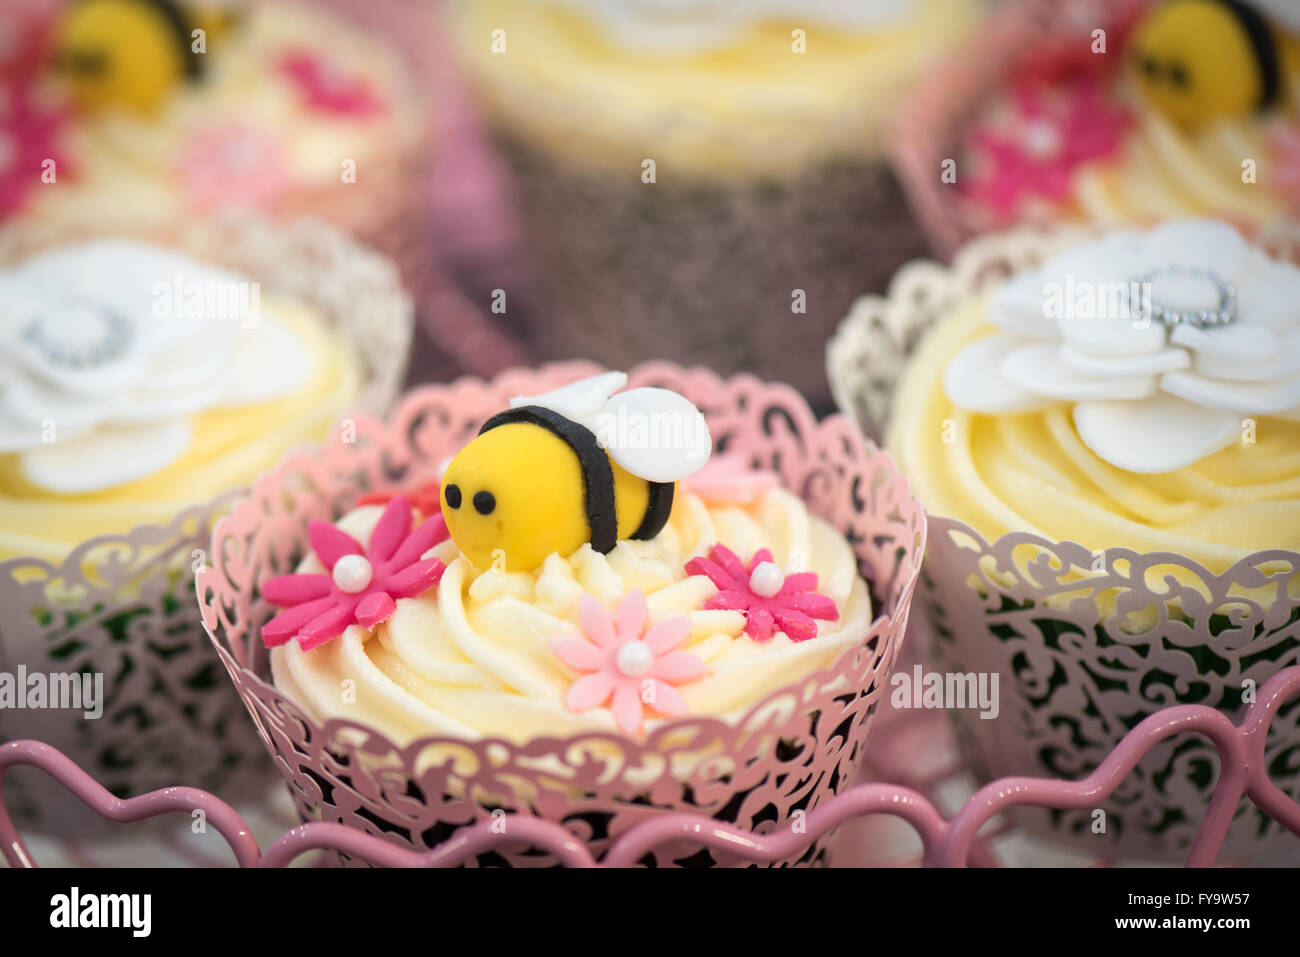 Honey bee and flowers cupcakes at Cake International – The Sugarcraft, Cake Decorating and Baking Show in London Stock Photo